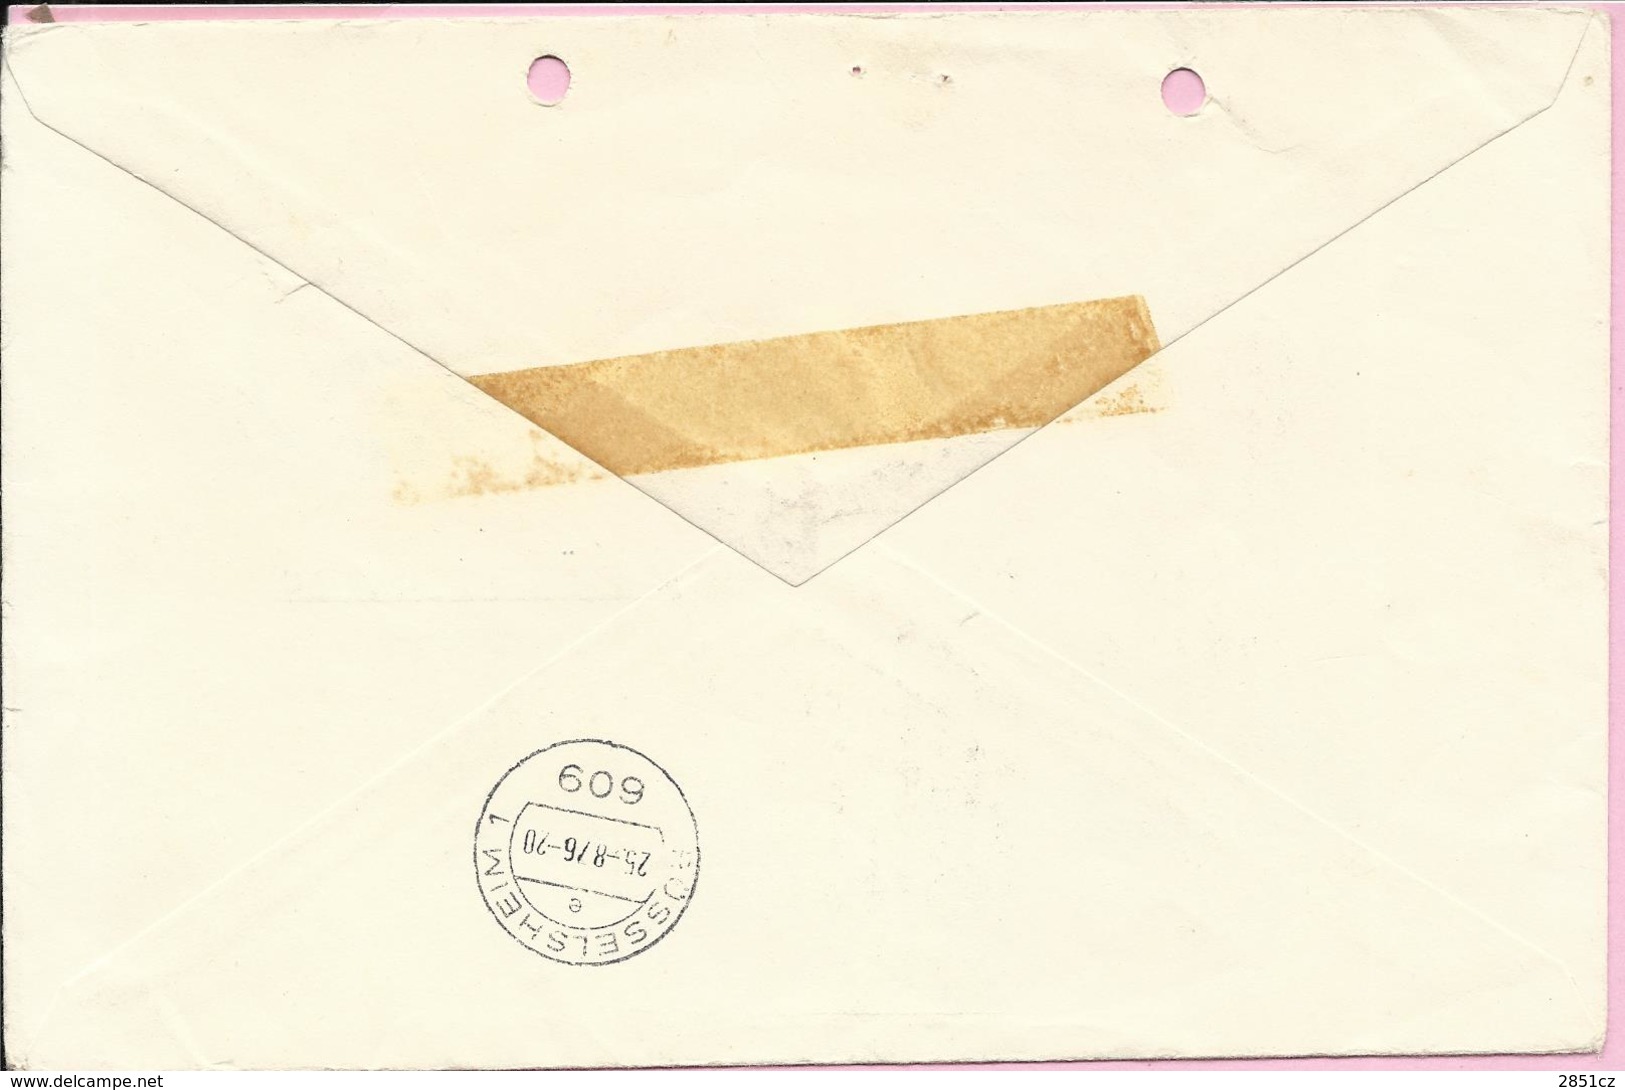 Letter - Kikinda-Russelsheim (Germany), 21.8.1976., Yugoslavia, Air Mail / Registrated, Envelope Iron Foundry - Poste Aérienne